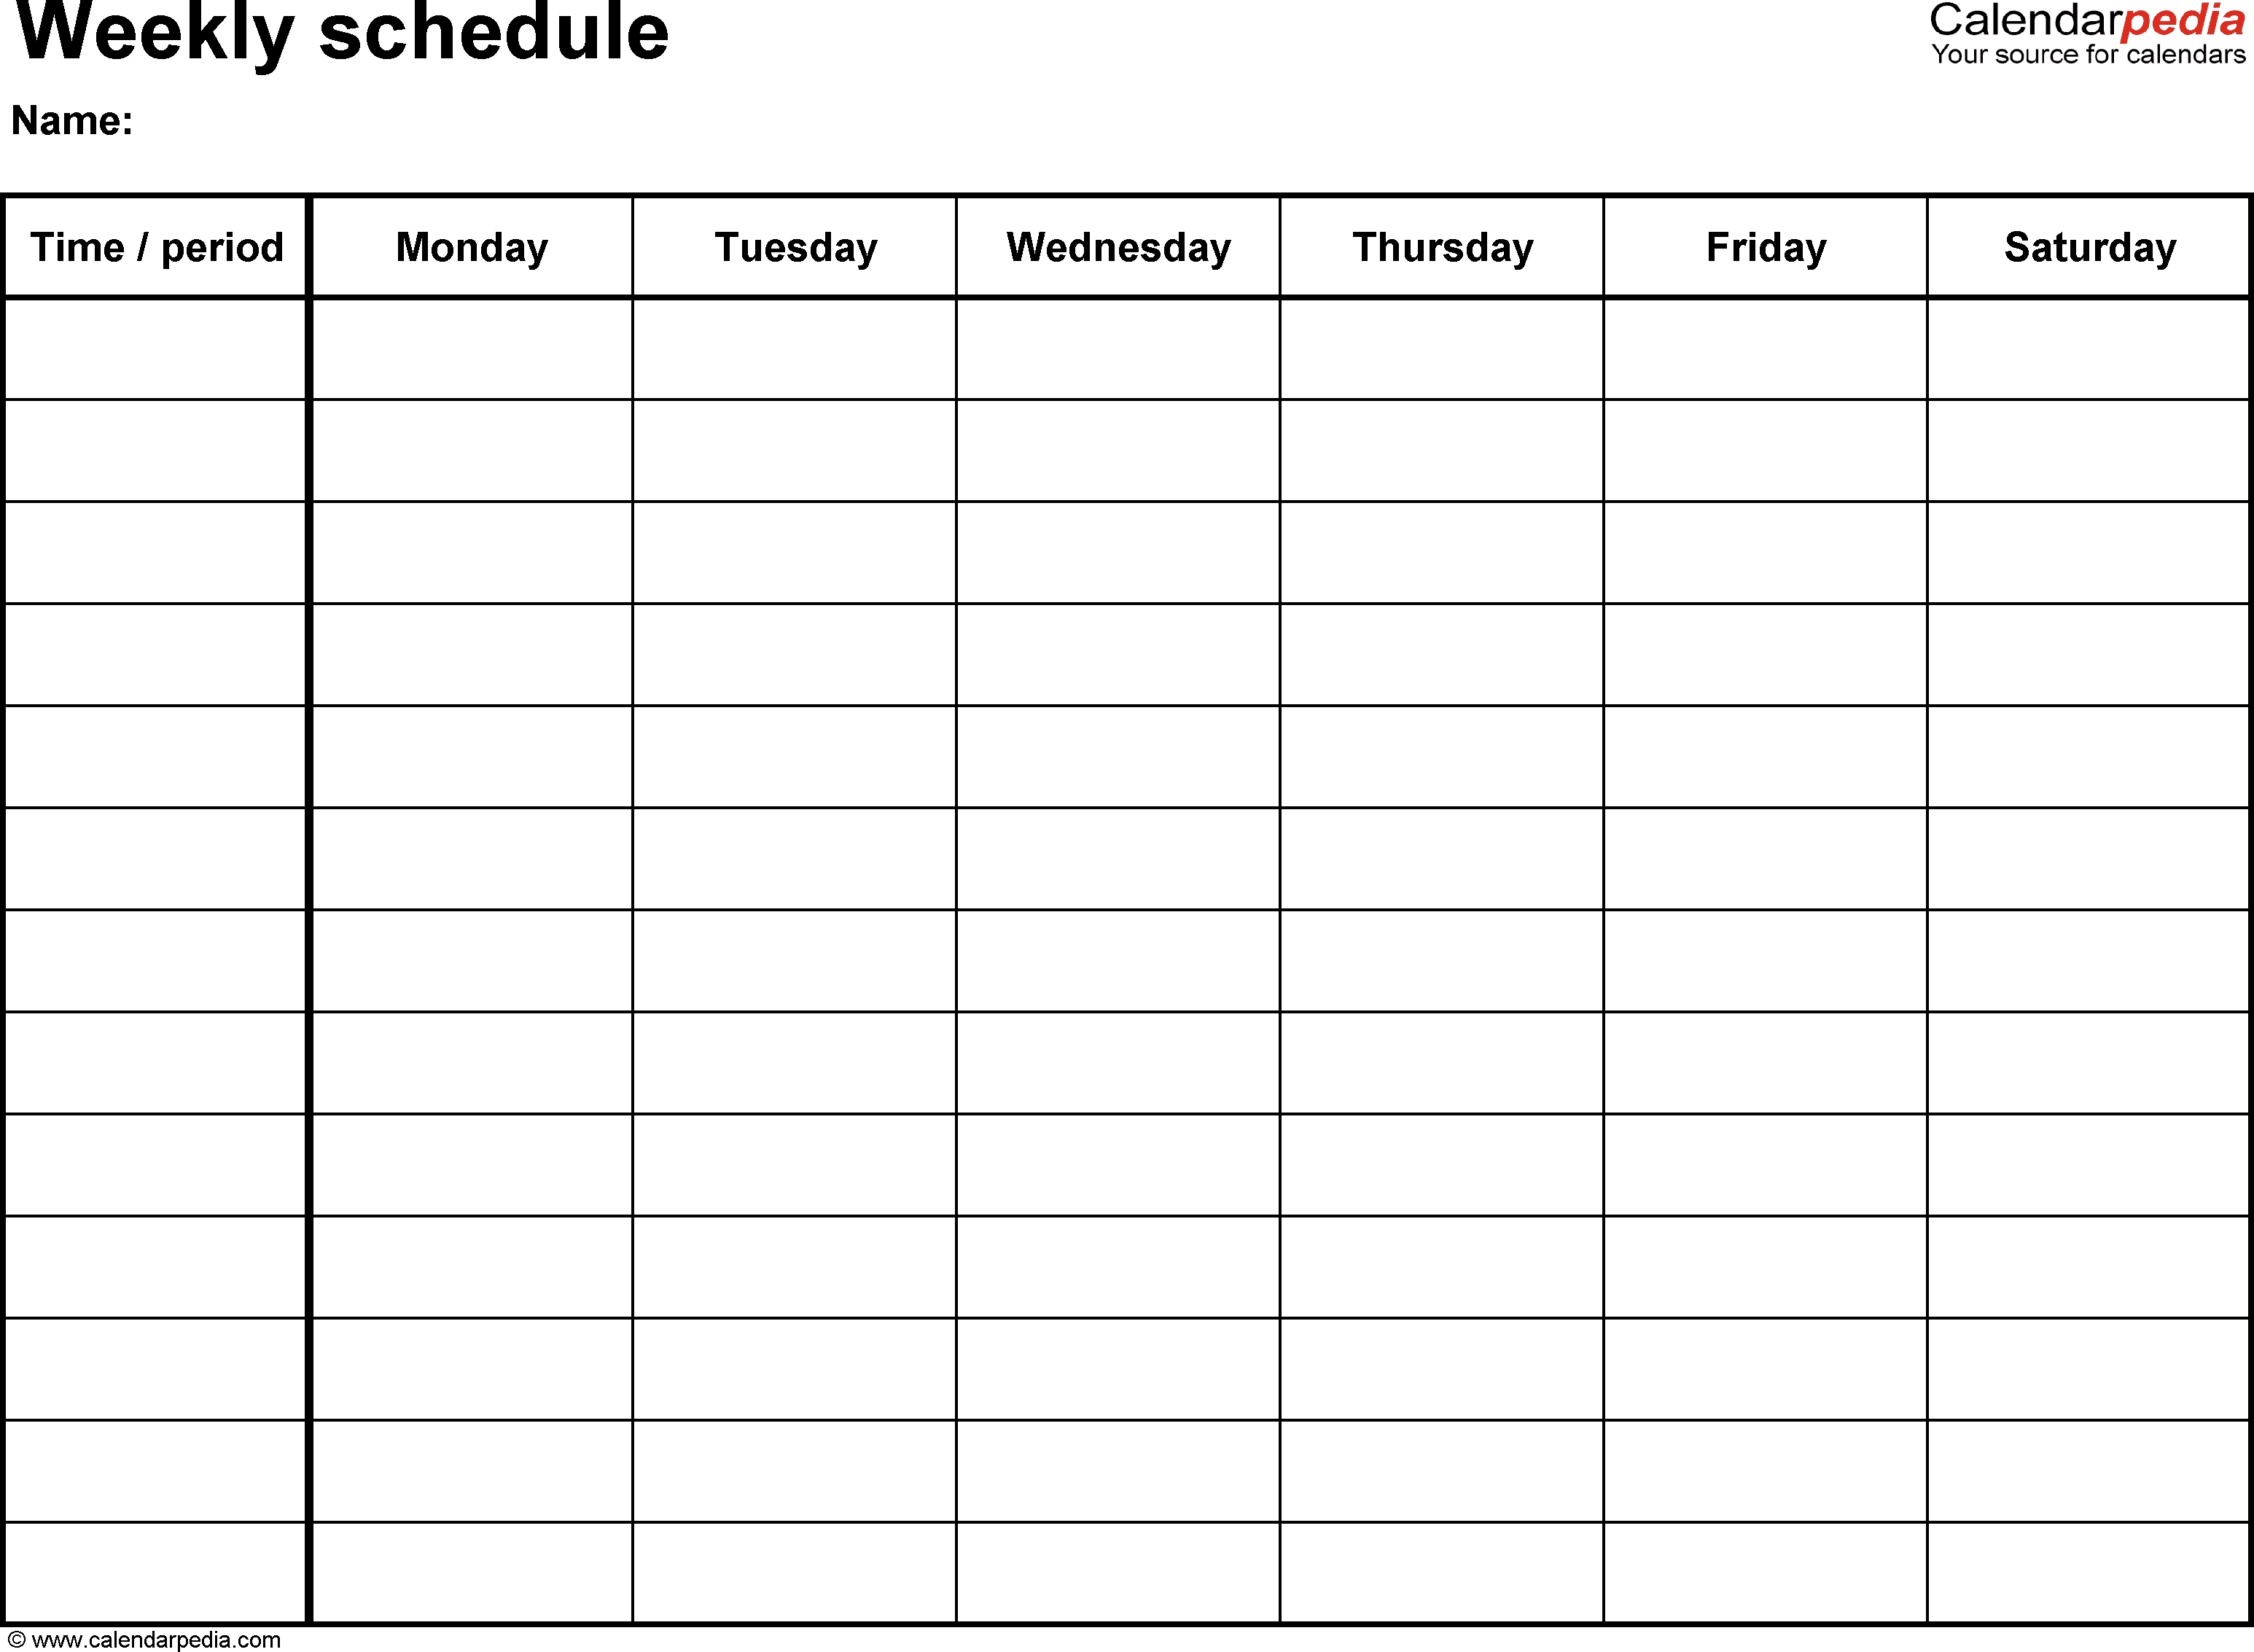 Free Weekly Schedule Templates For Word - 18 Templates pertaining to Blank Calendar To Fill In Free